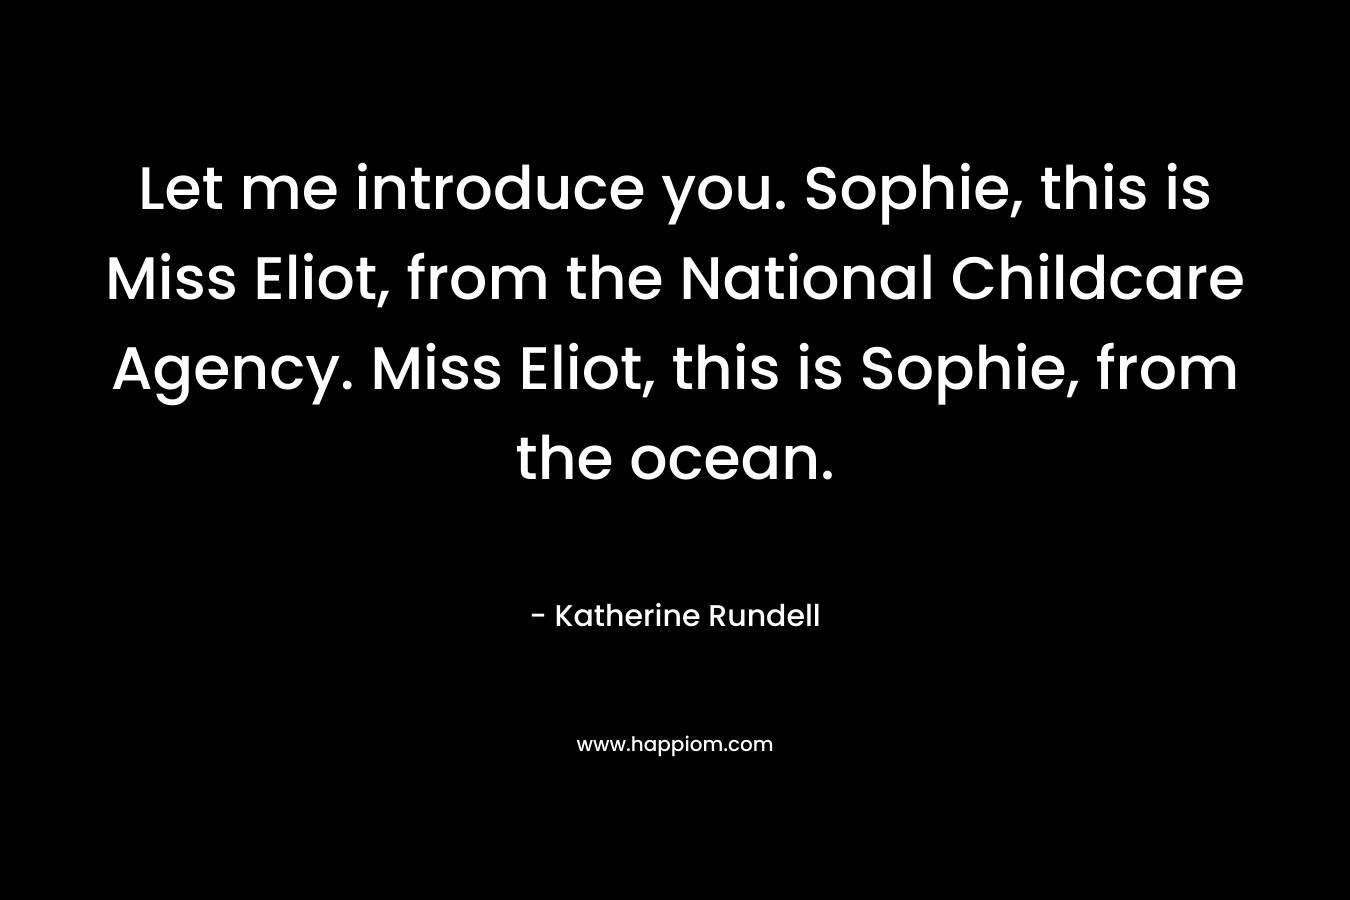 Let me introduce you. Sophie, this is Miss Eliot, from the National Childcare Agency. Miss Eliot, this is Sophie, from the ocean.